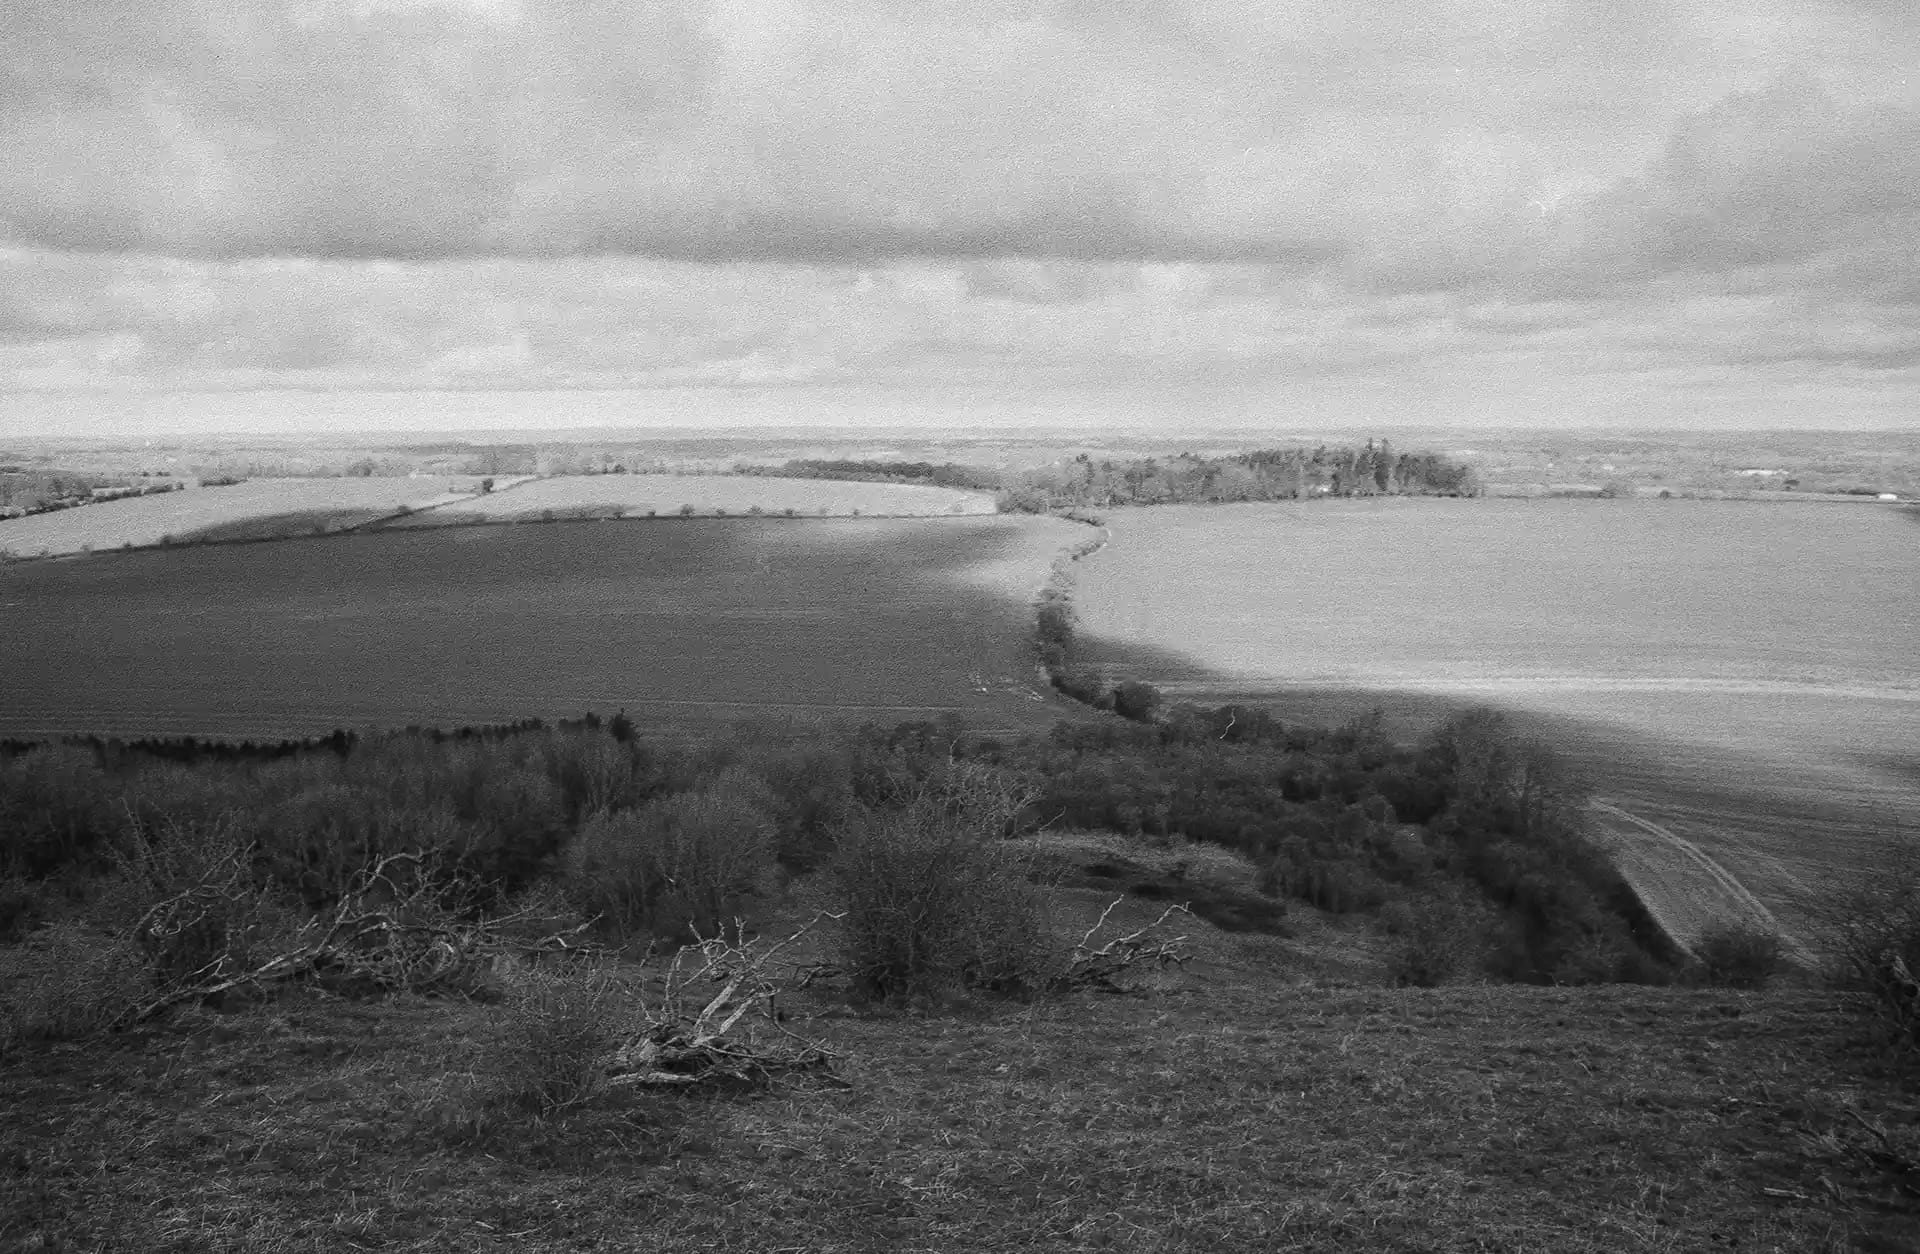 Looking North from Watership Down for my photography project.